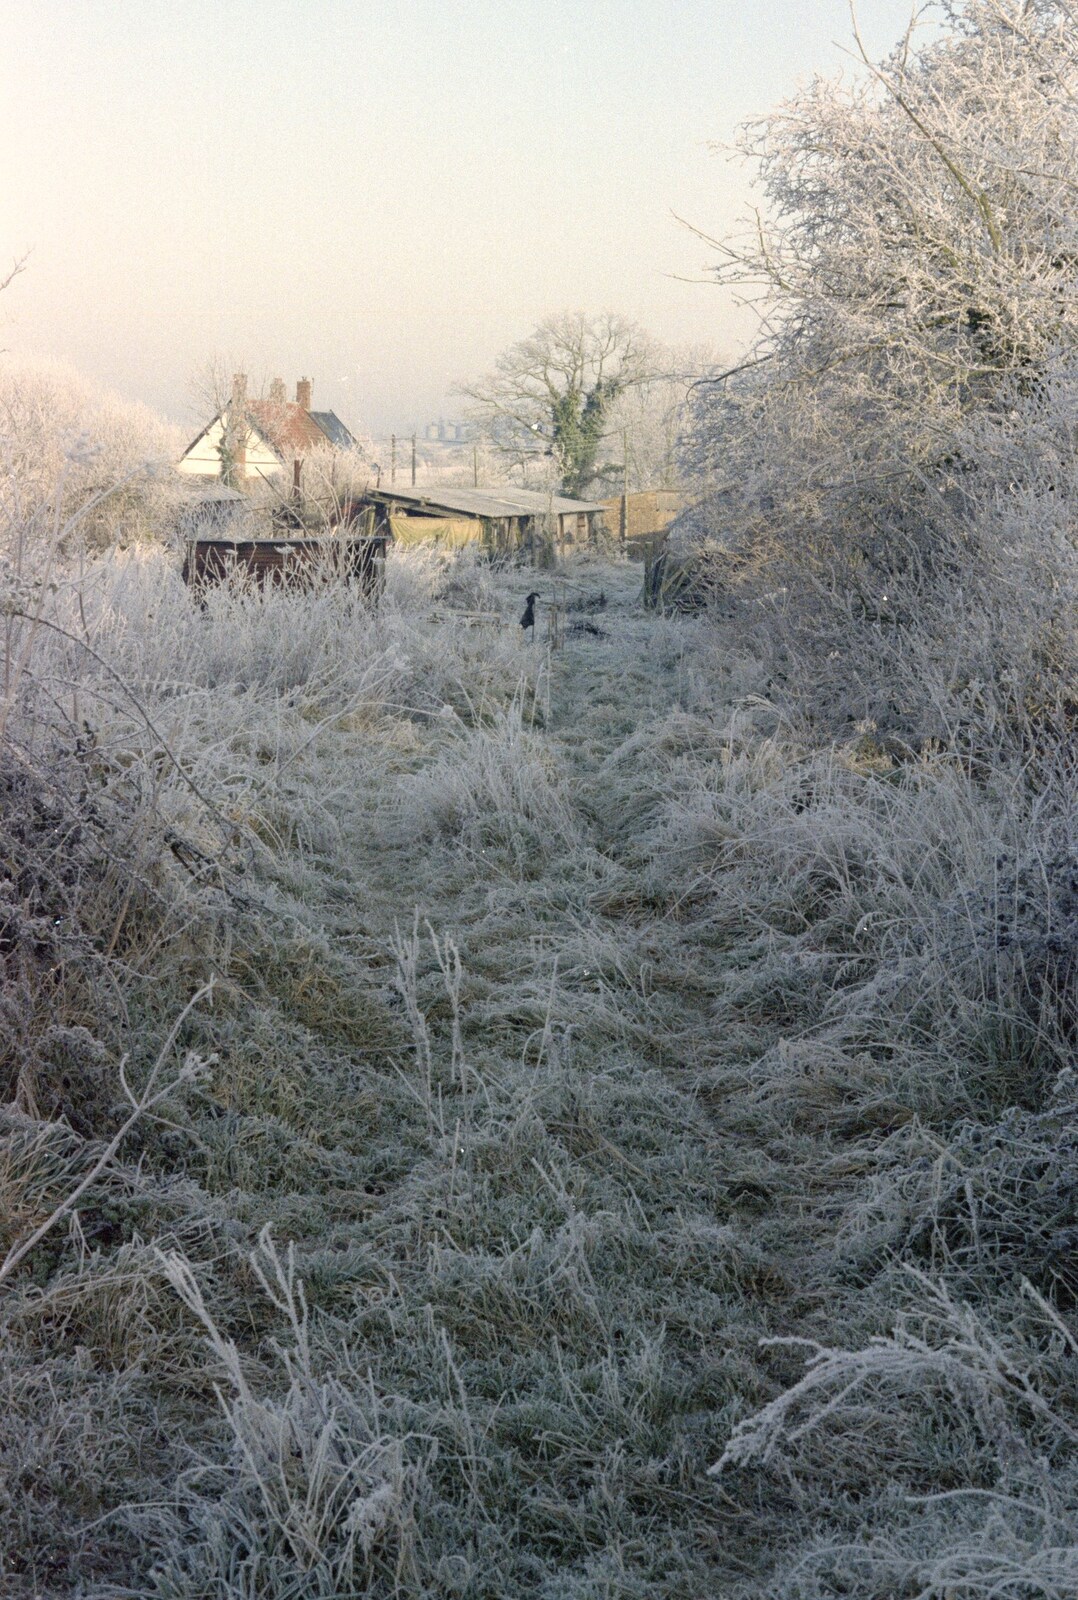 Looking back towards The Stables from A Frosty Morning, Suffolk and Norfolk - 15th December 1991